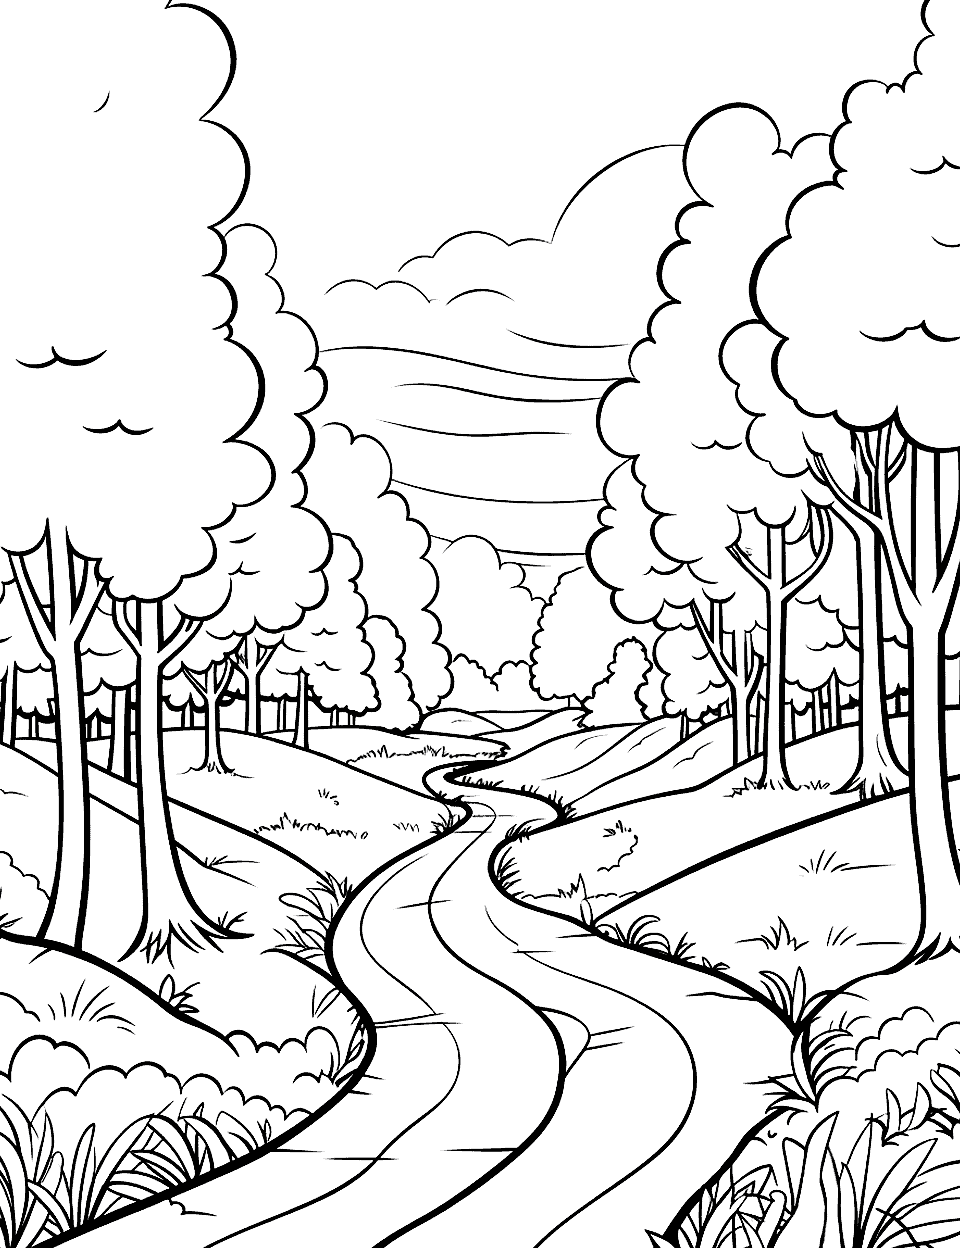 Enchanted Forest Path Coloring Page - A winding path through a forest with towering trees.